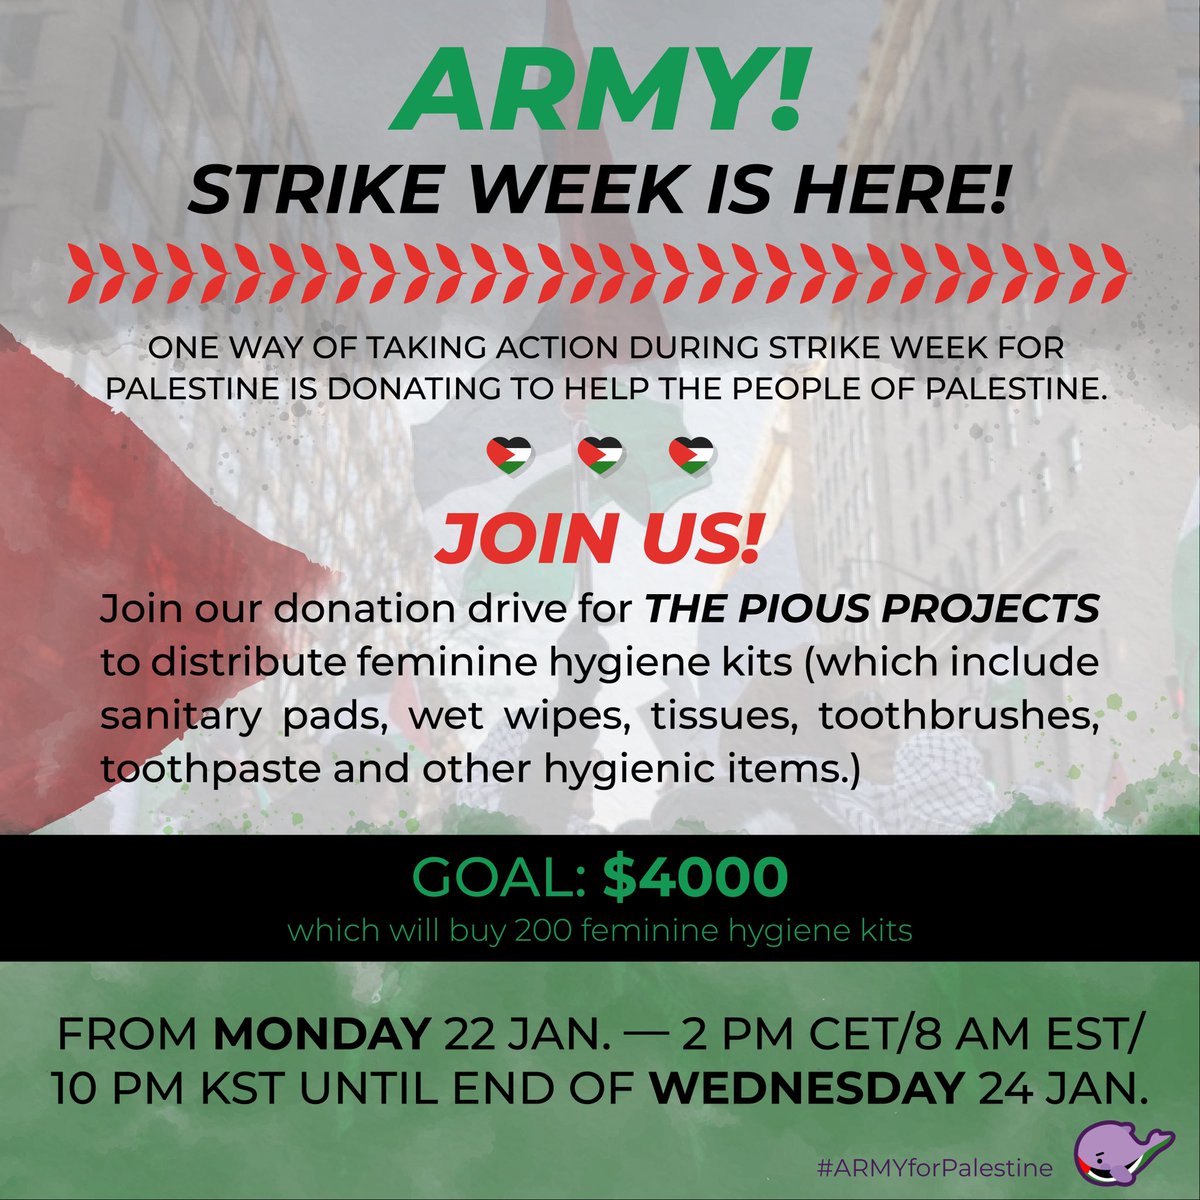 🚨Our donation drive starts NOW! Donate to The Pious Projects to distribute feminine hygiene kits in Gaza and please quote/reply with a screenshot so we can keep count. Our goal is $4000 which will buy 200 kits. Link to donate below👇🏼
#ShutItDown4Palestine #StrikeForGaza